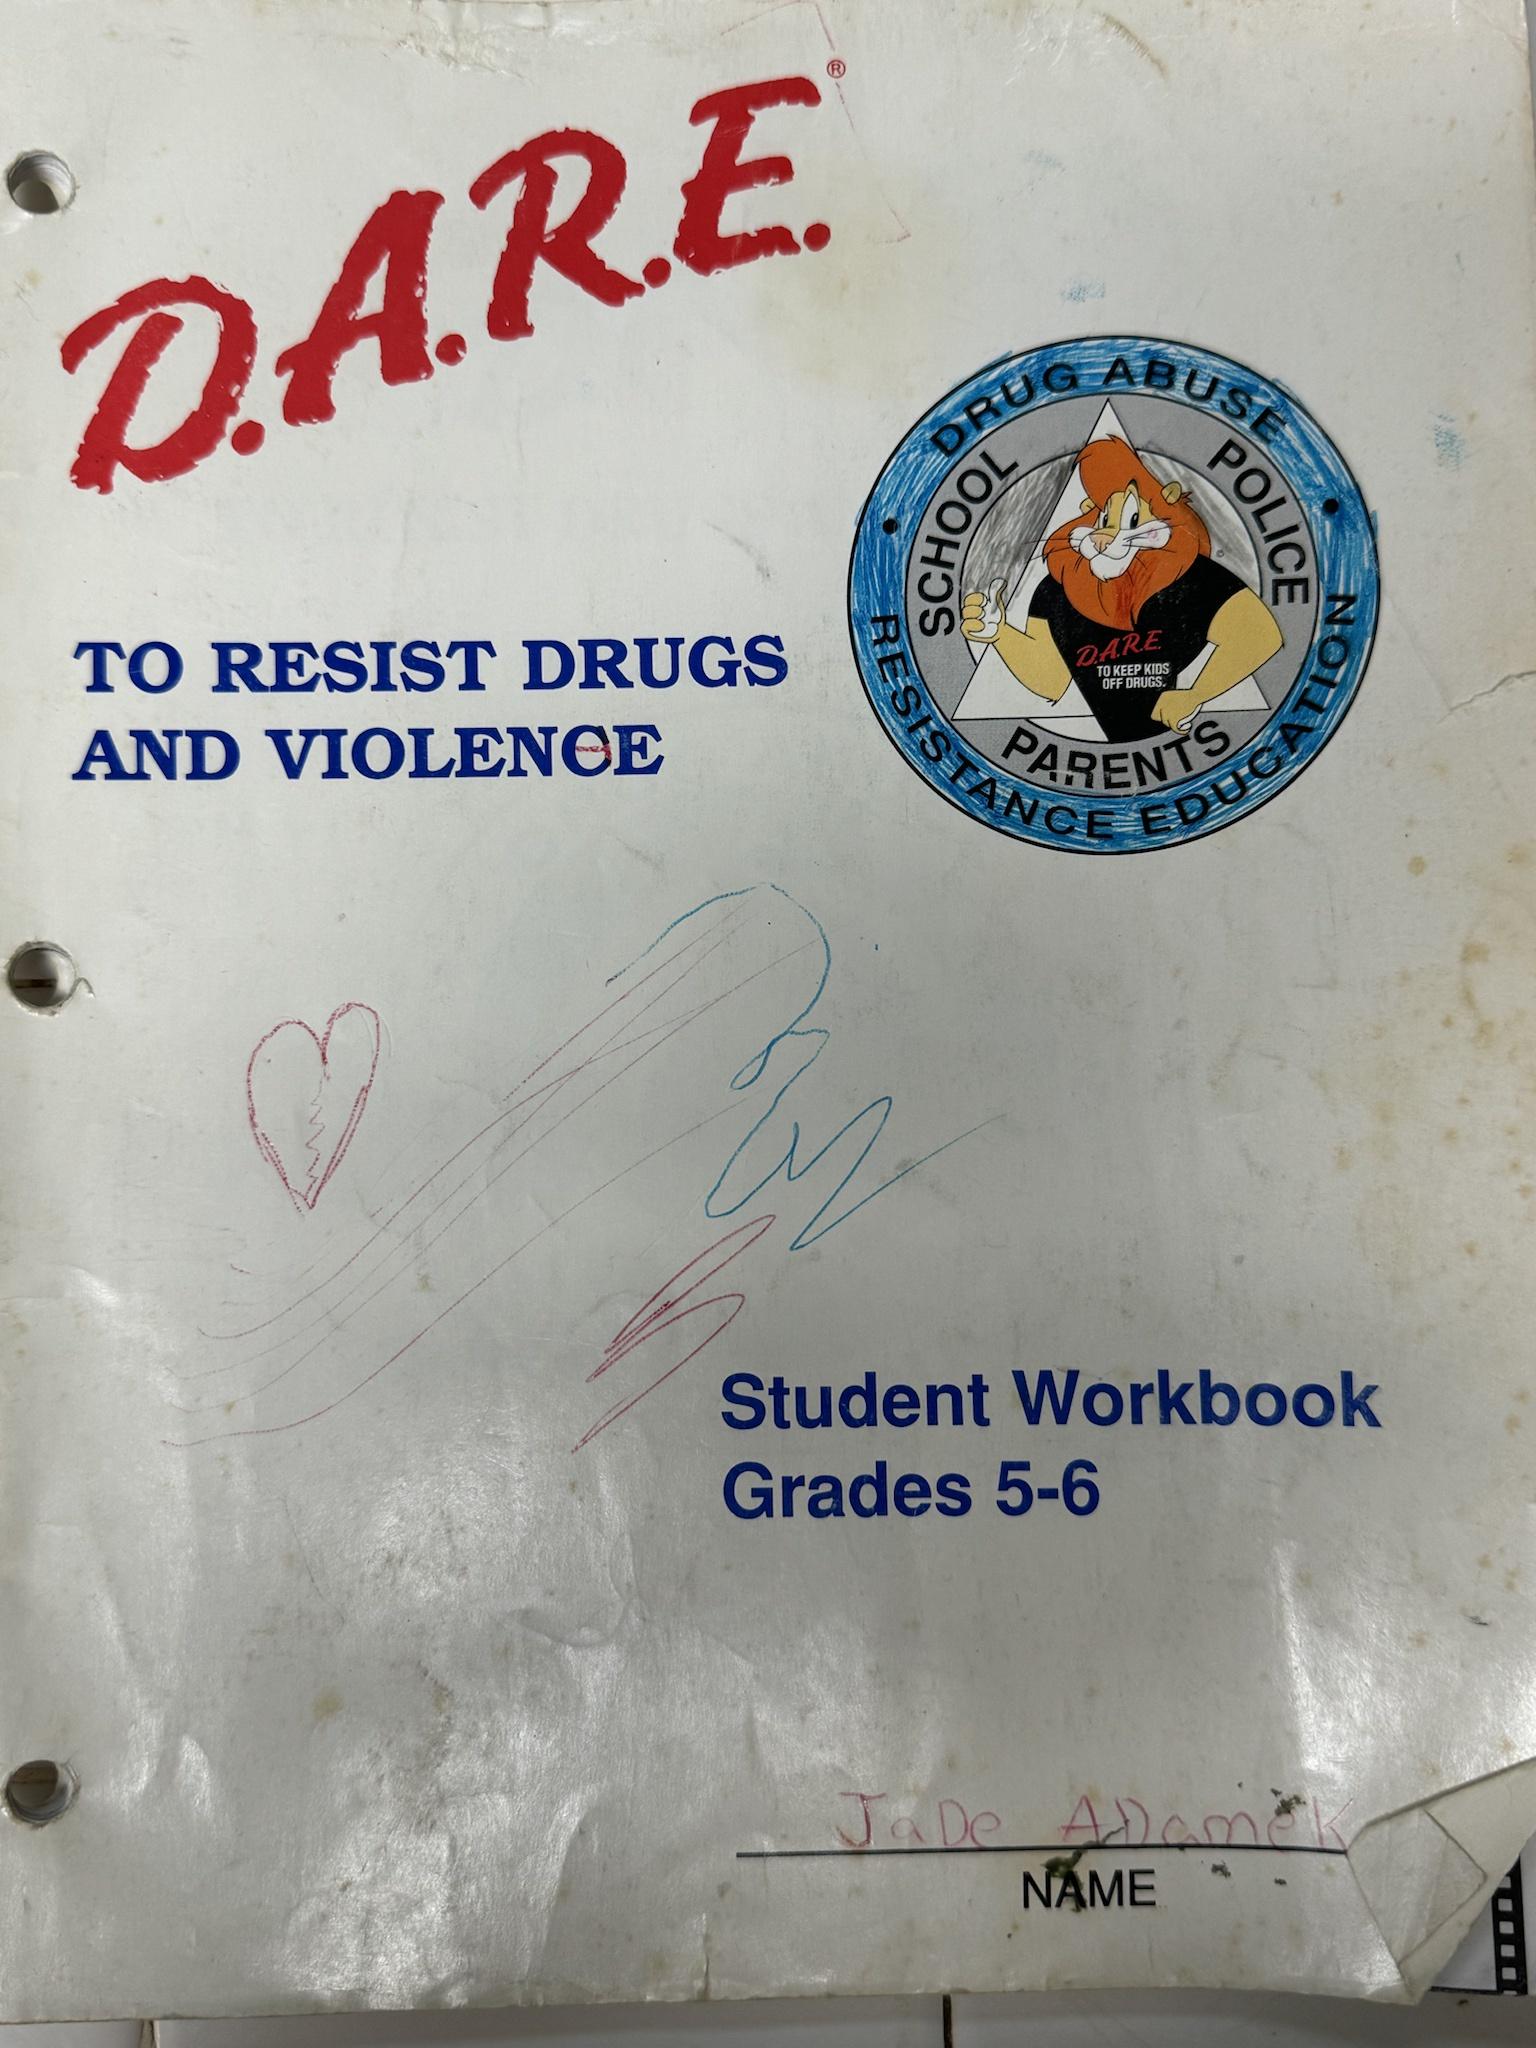 D.A.R.E. Workbook from 1994